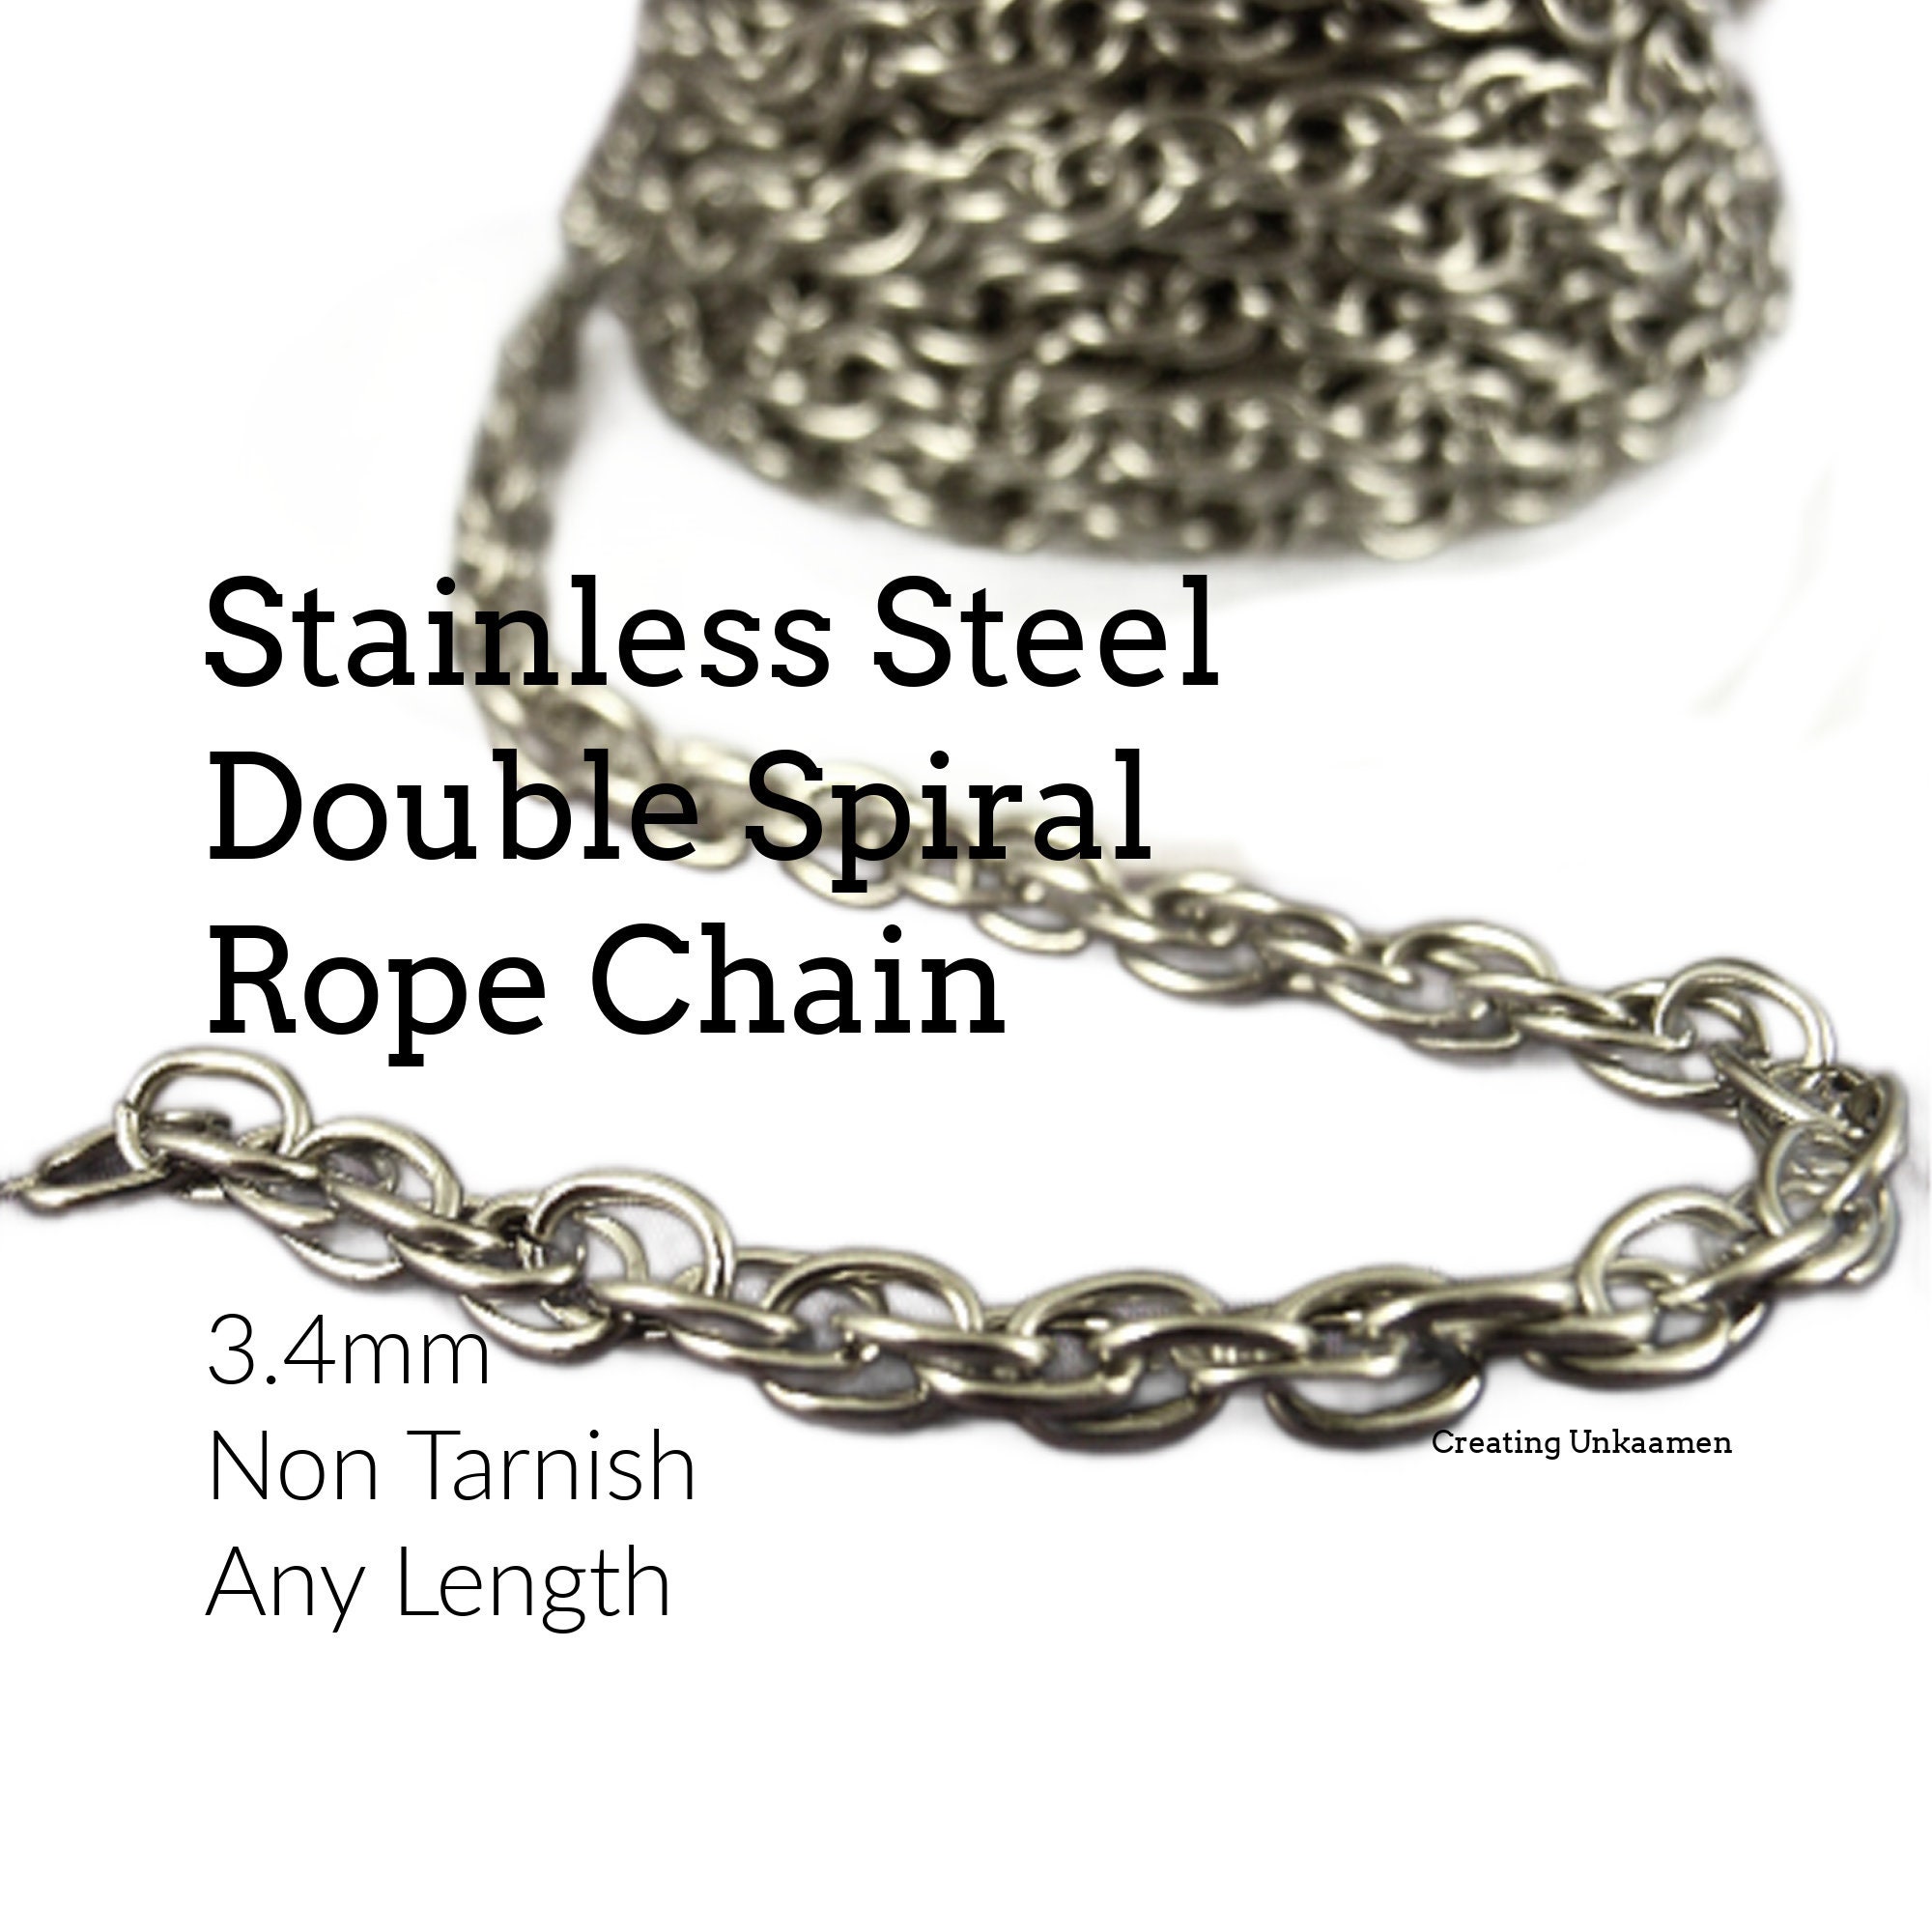 Cable Chain 3mm Surgical Stainless Steel (Priced per Foot)